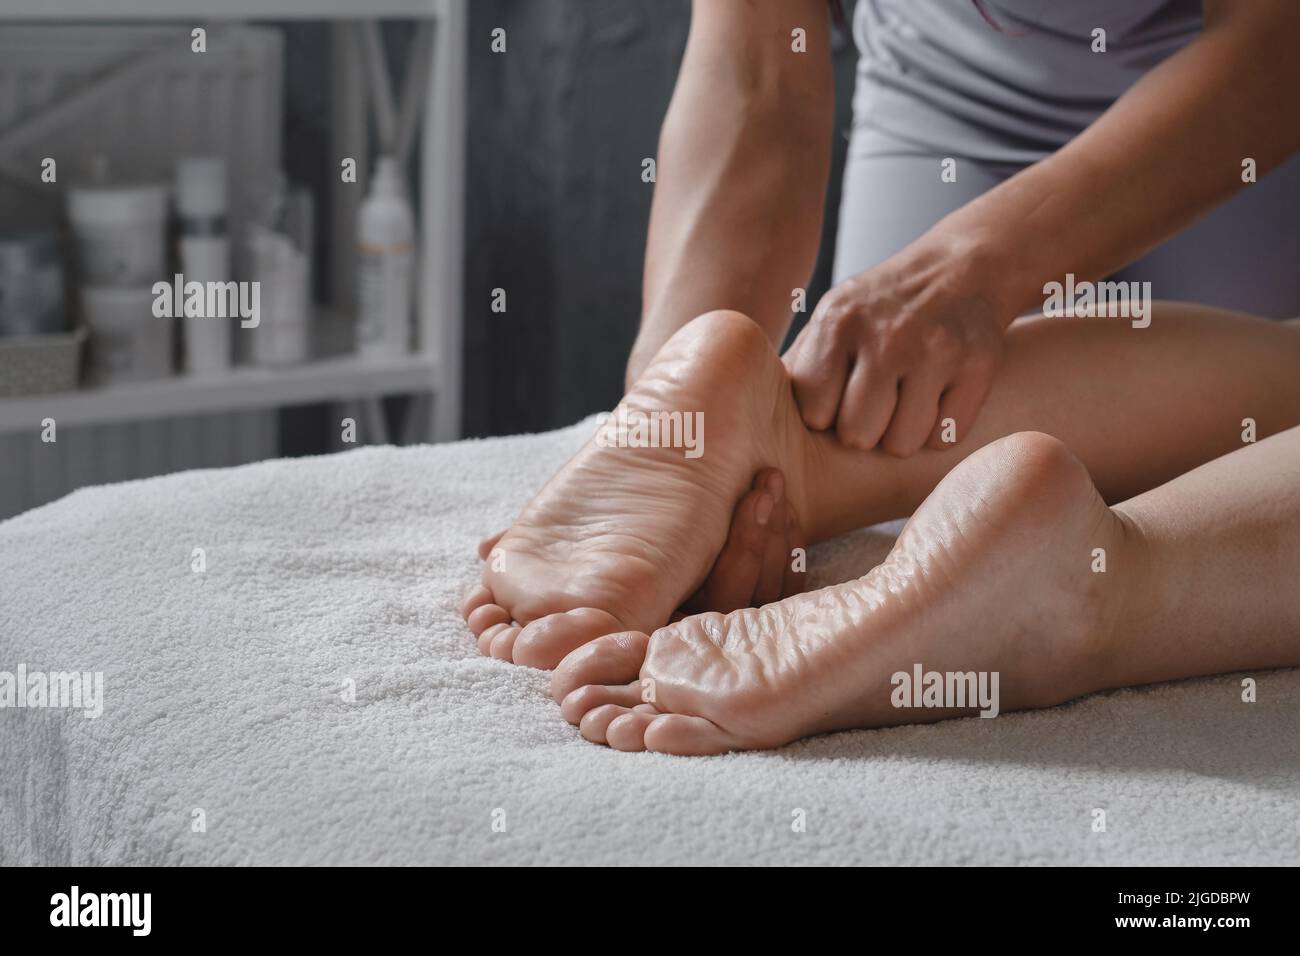 Woman Foot spa massage treatment by professional massage therapist in spa resort. Wellness, stress relief and rejuvenation concept. Body care Stock Photo